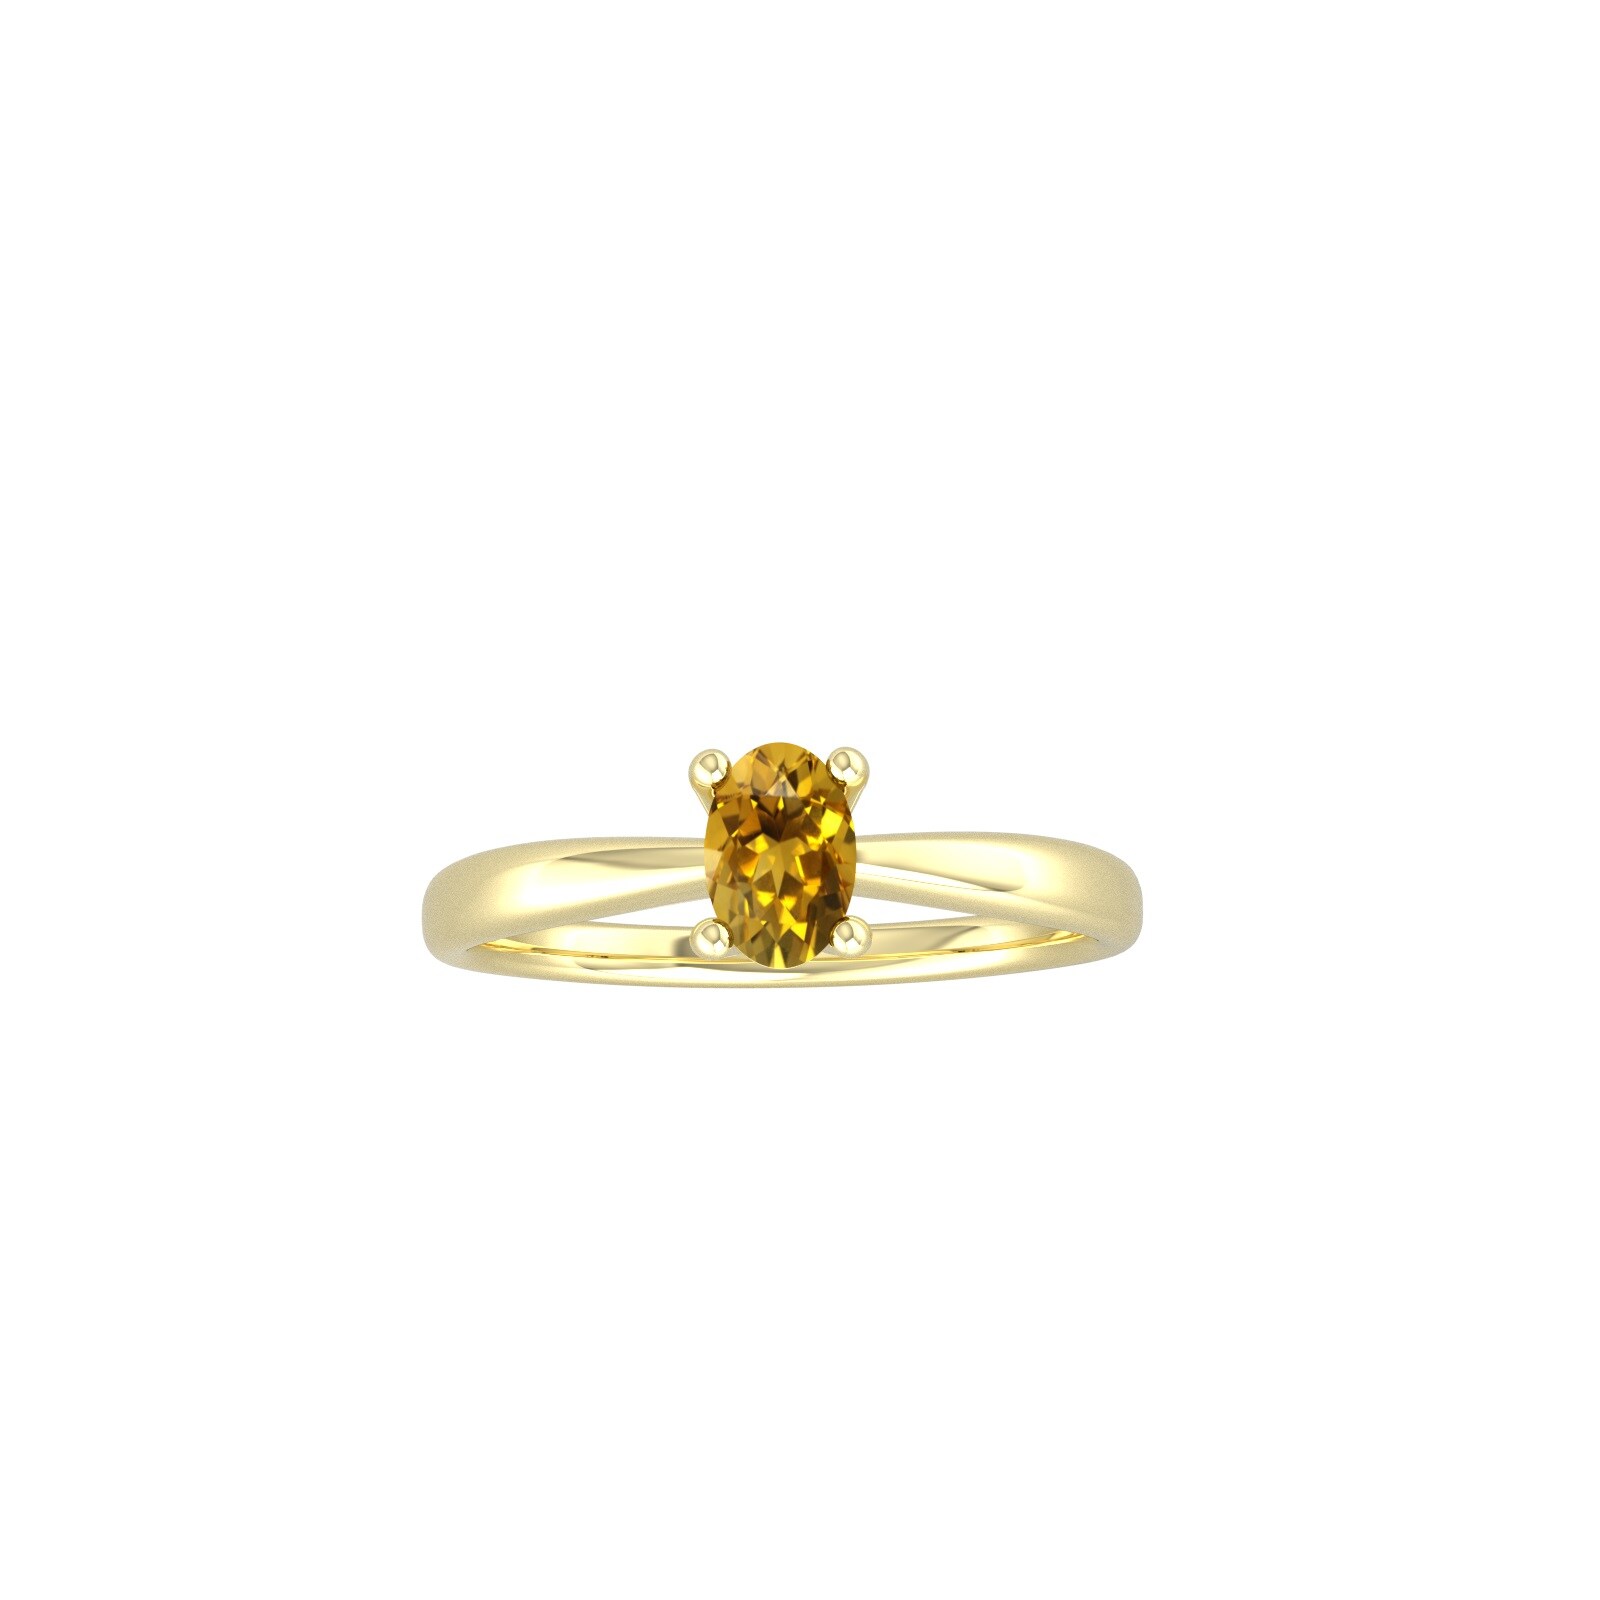 9ct Yellow Gold 4 Claw Oval Citrine Ring